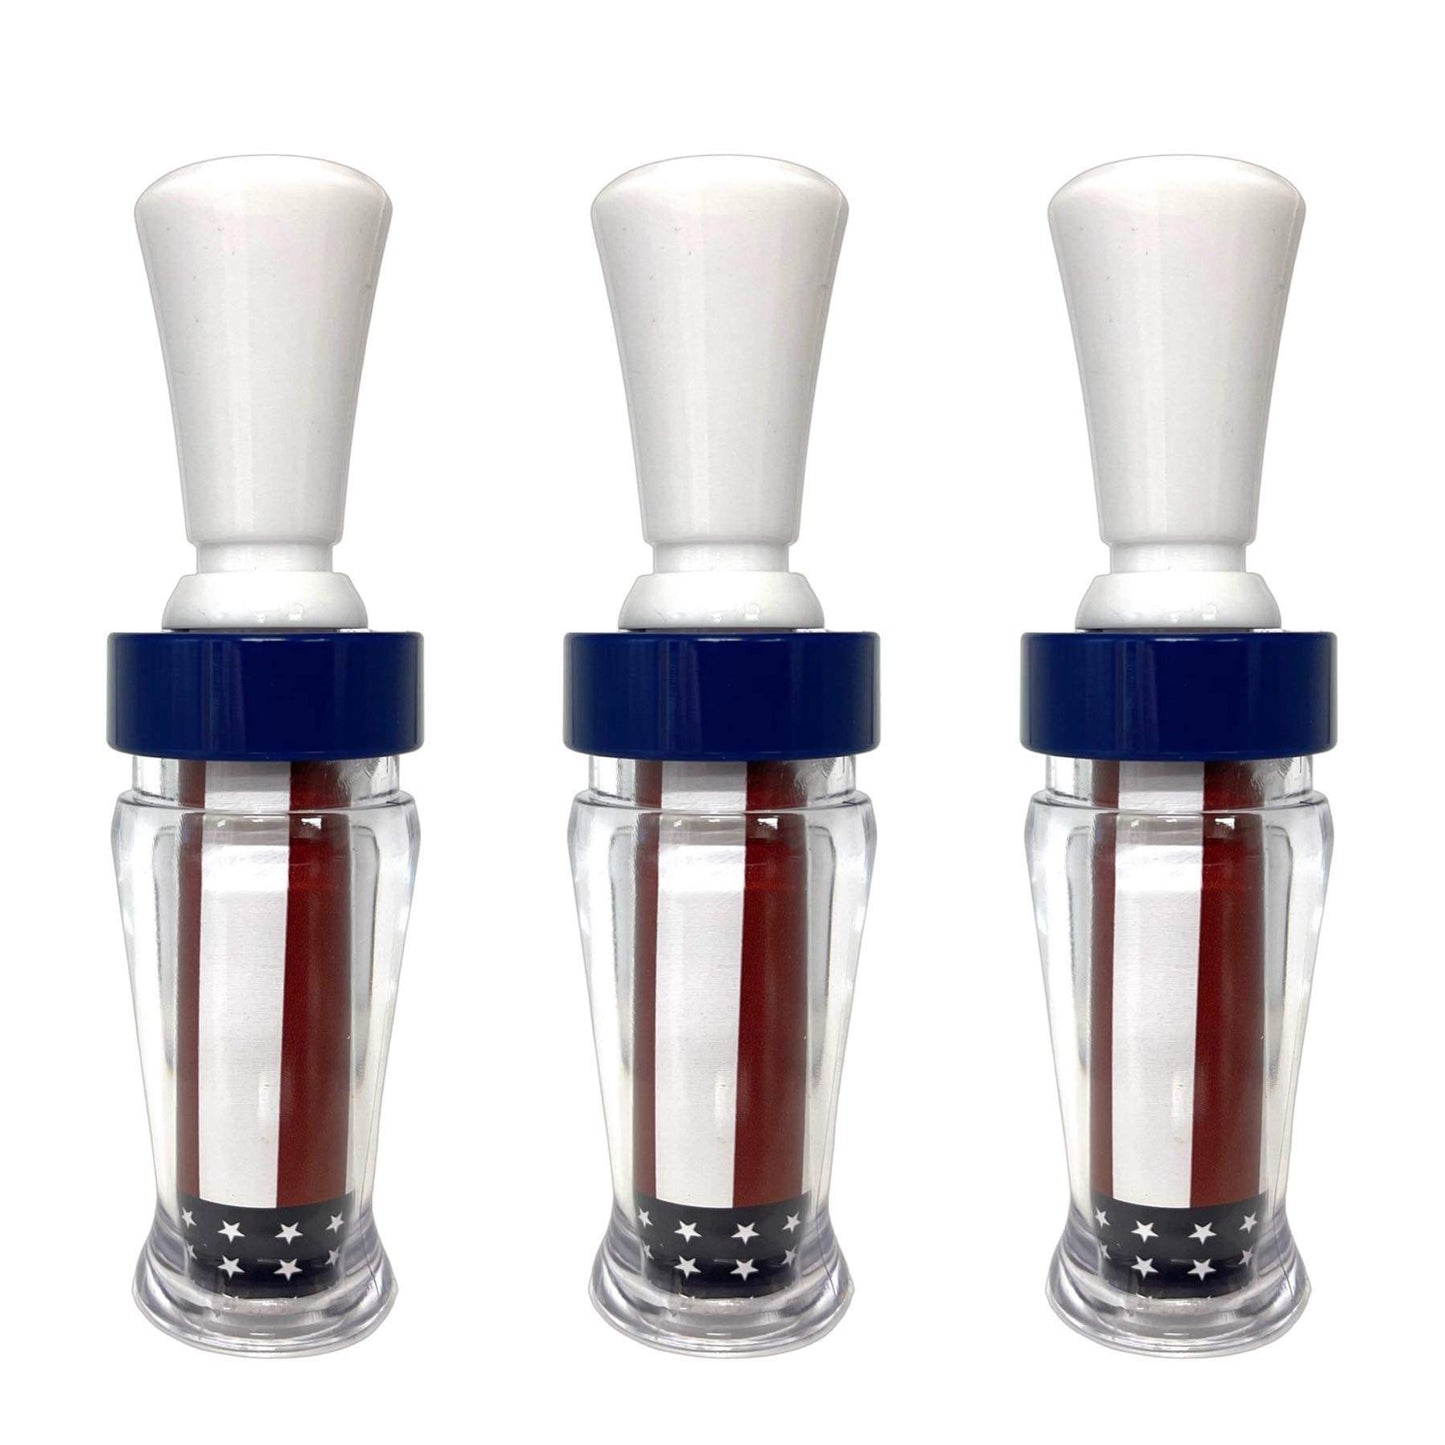 POLYCARBONATE IMAGE DUCK CALL AMERICAN FLAG